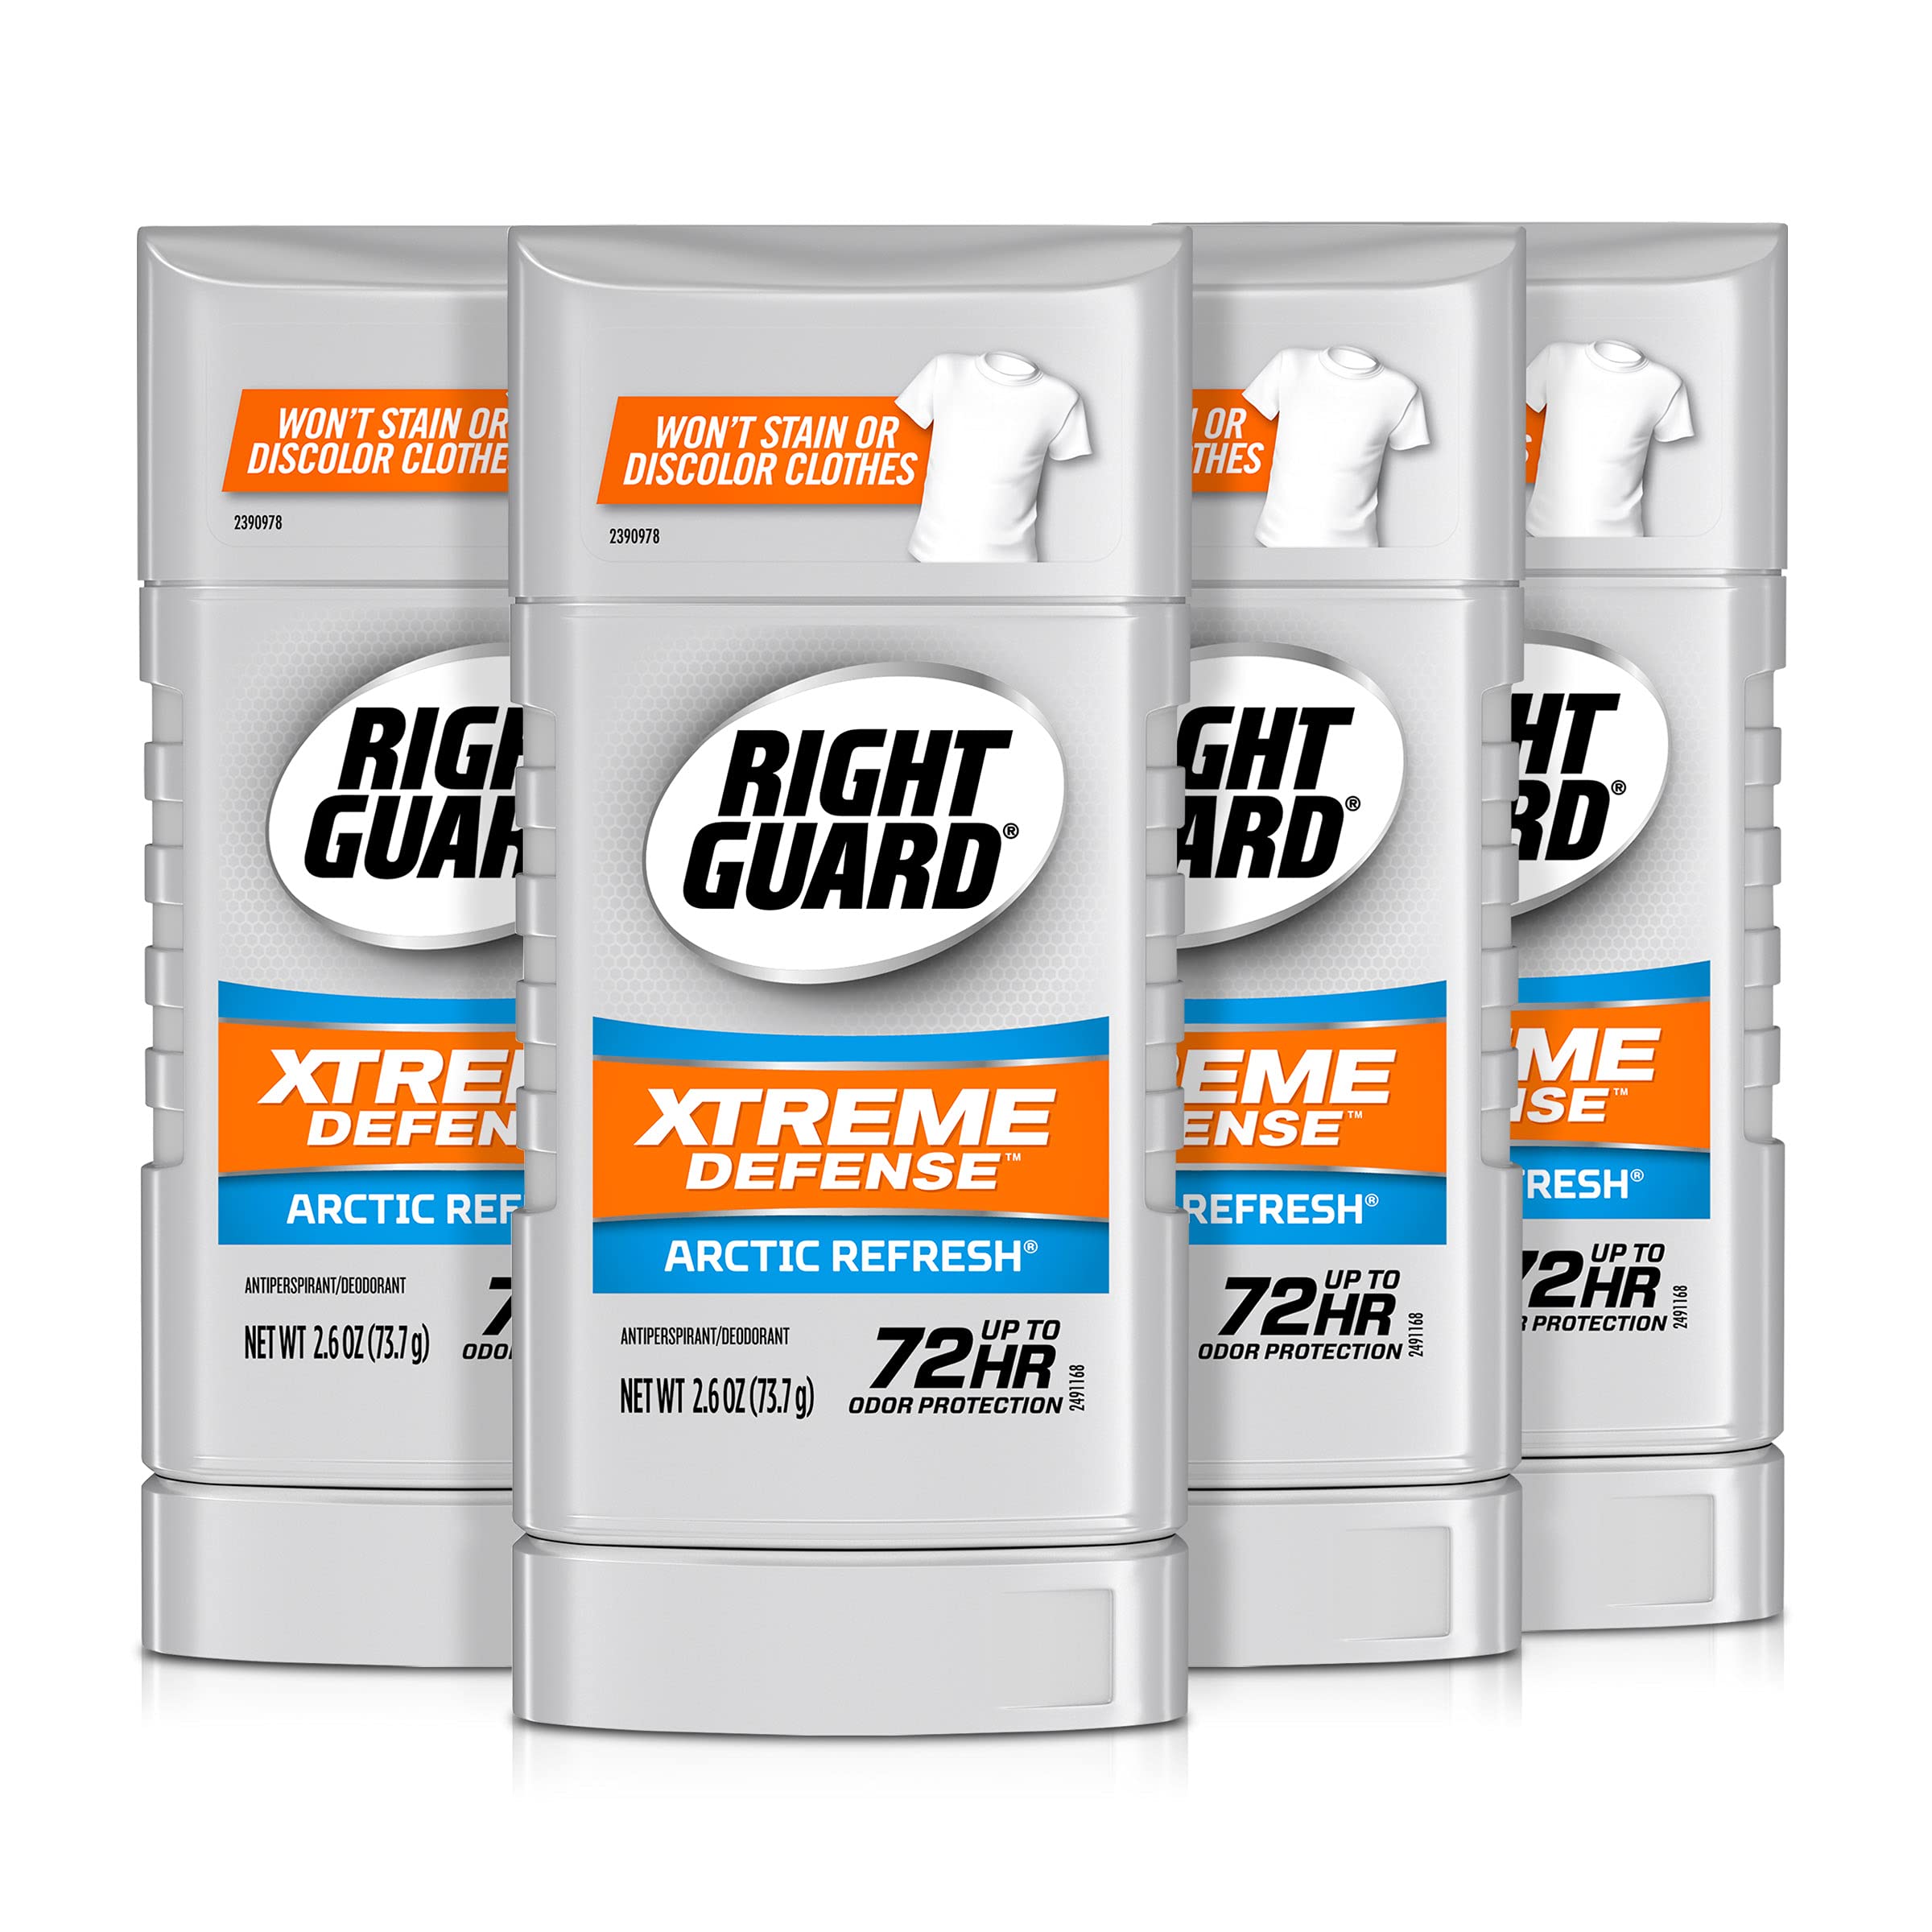 Right Guard Xtreme Defense Antiperspirant Deodorant Invisible Solid Stick, Arctic Refresh, 2.6 Ounce , 4 Count (Pack of 1)